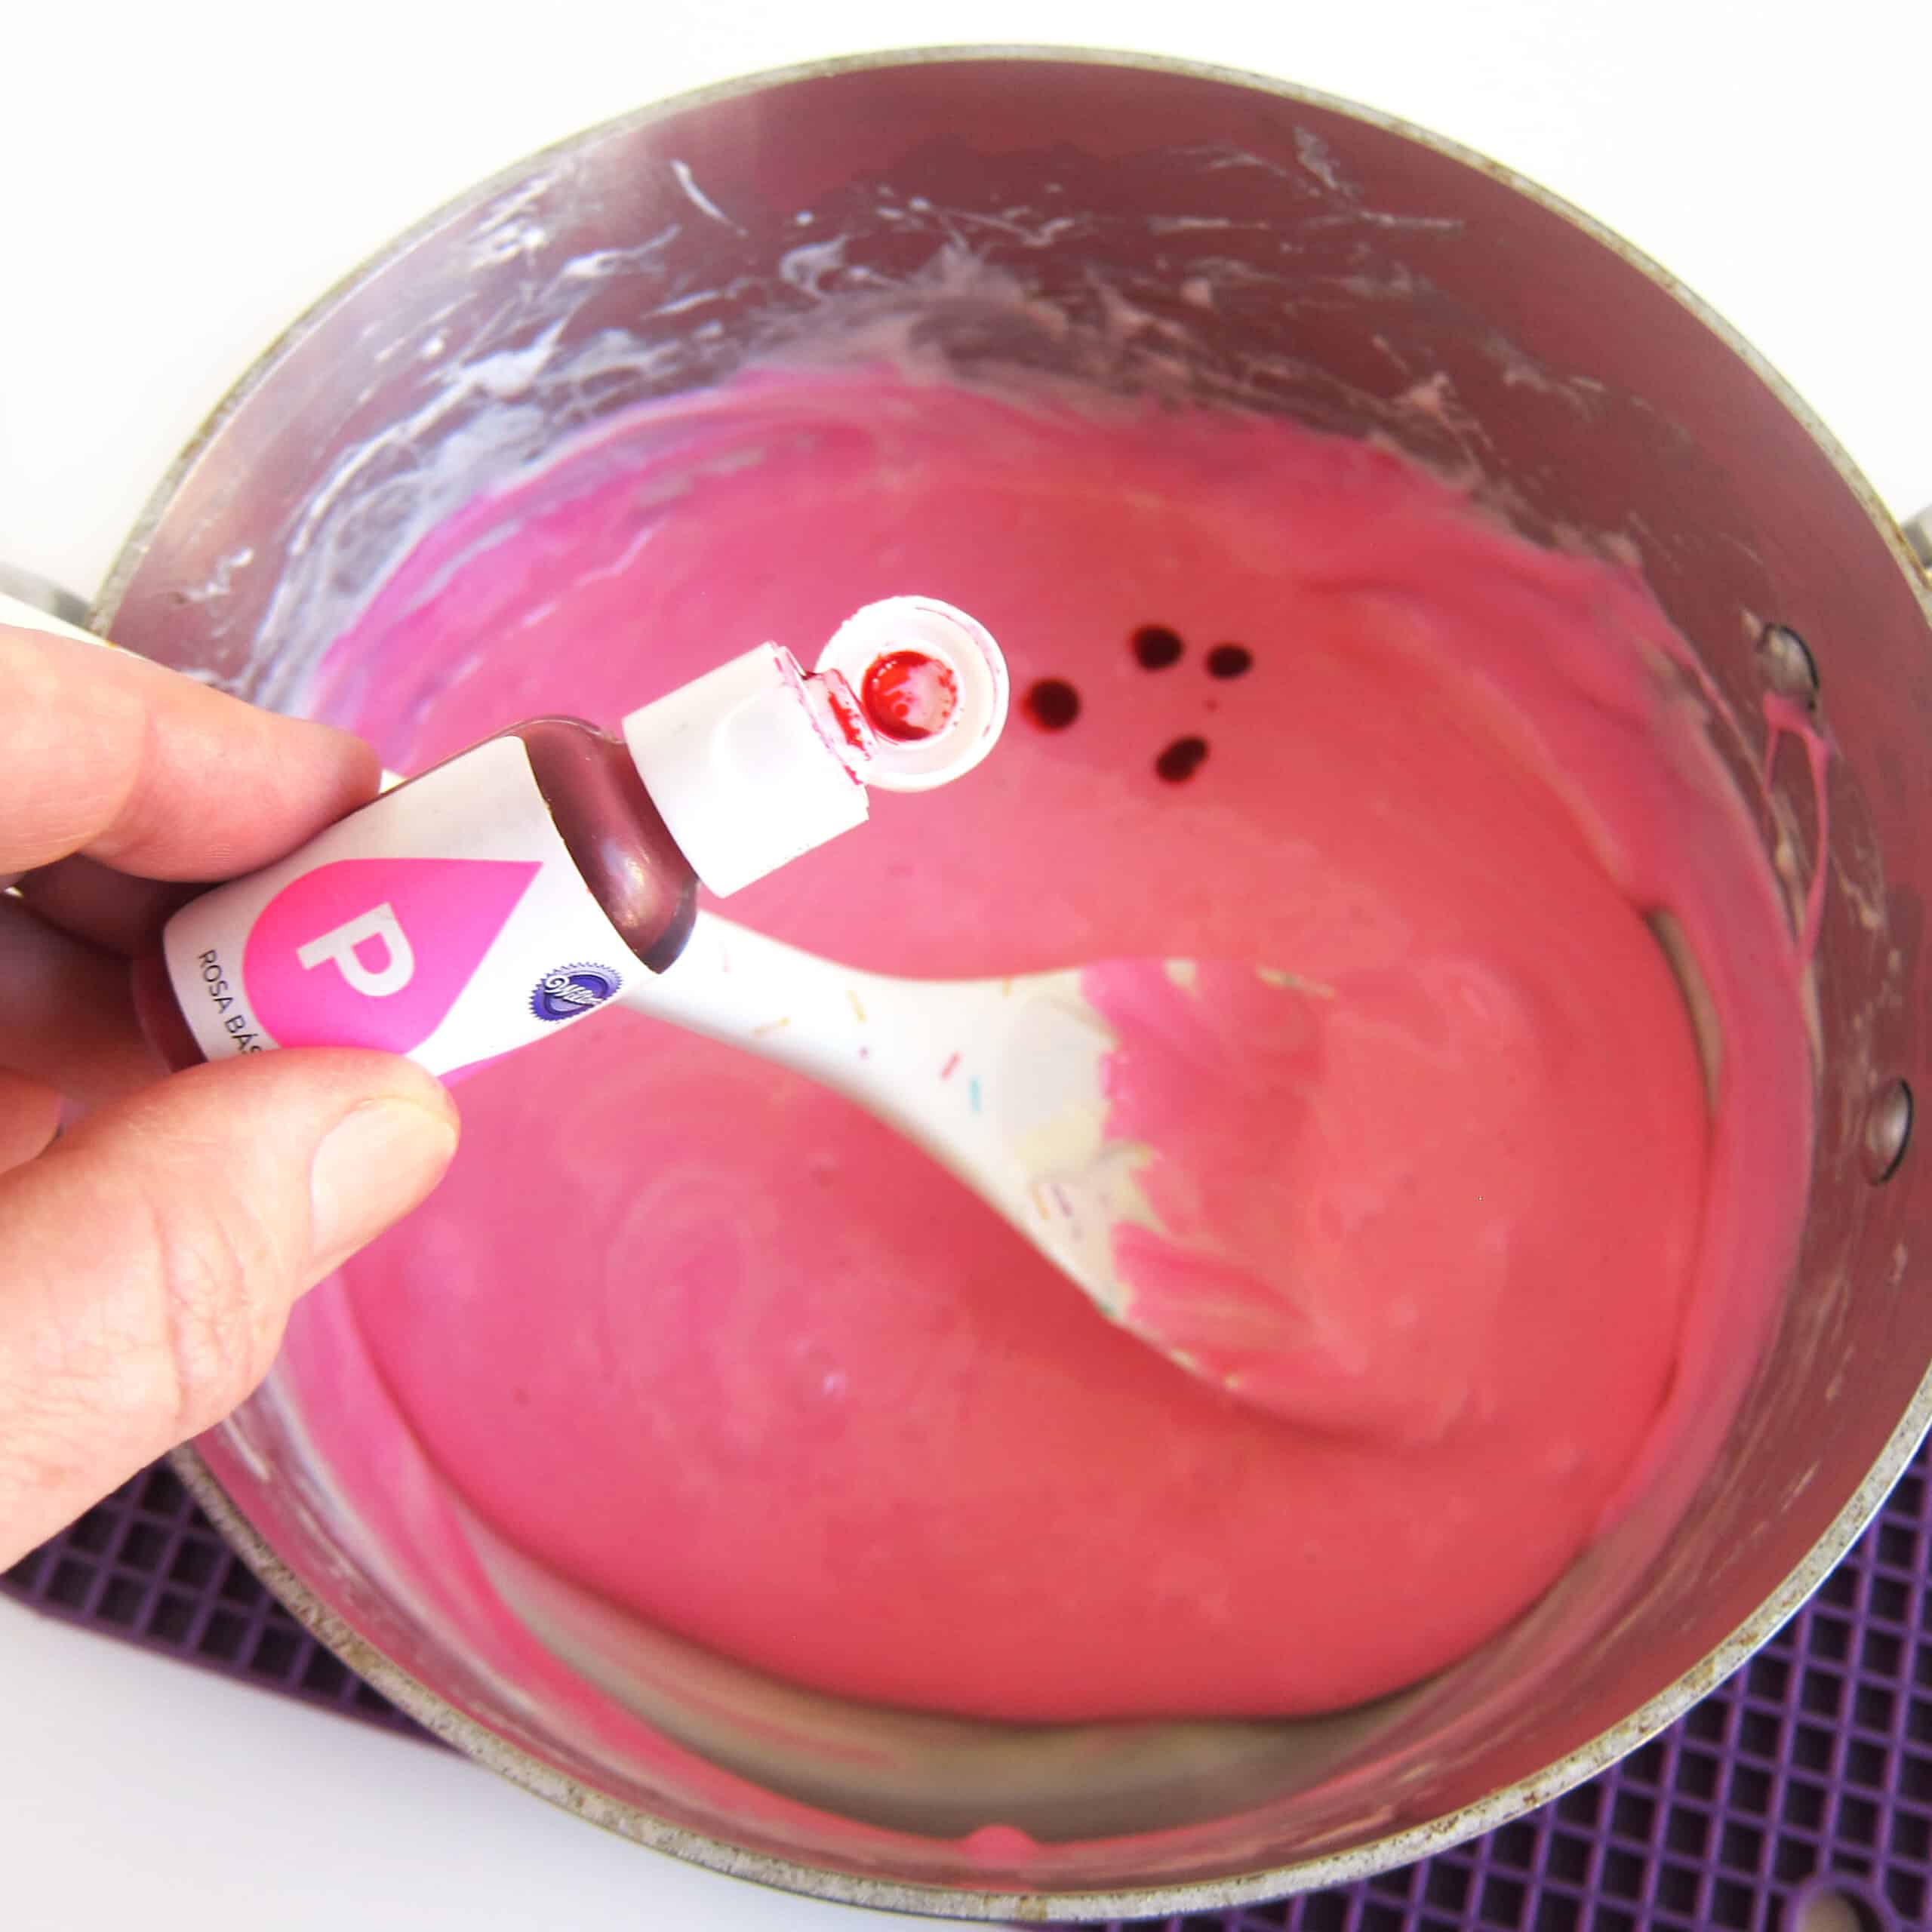 adding more pink food coloring to pink-colored melted marshmallows